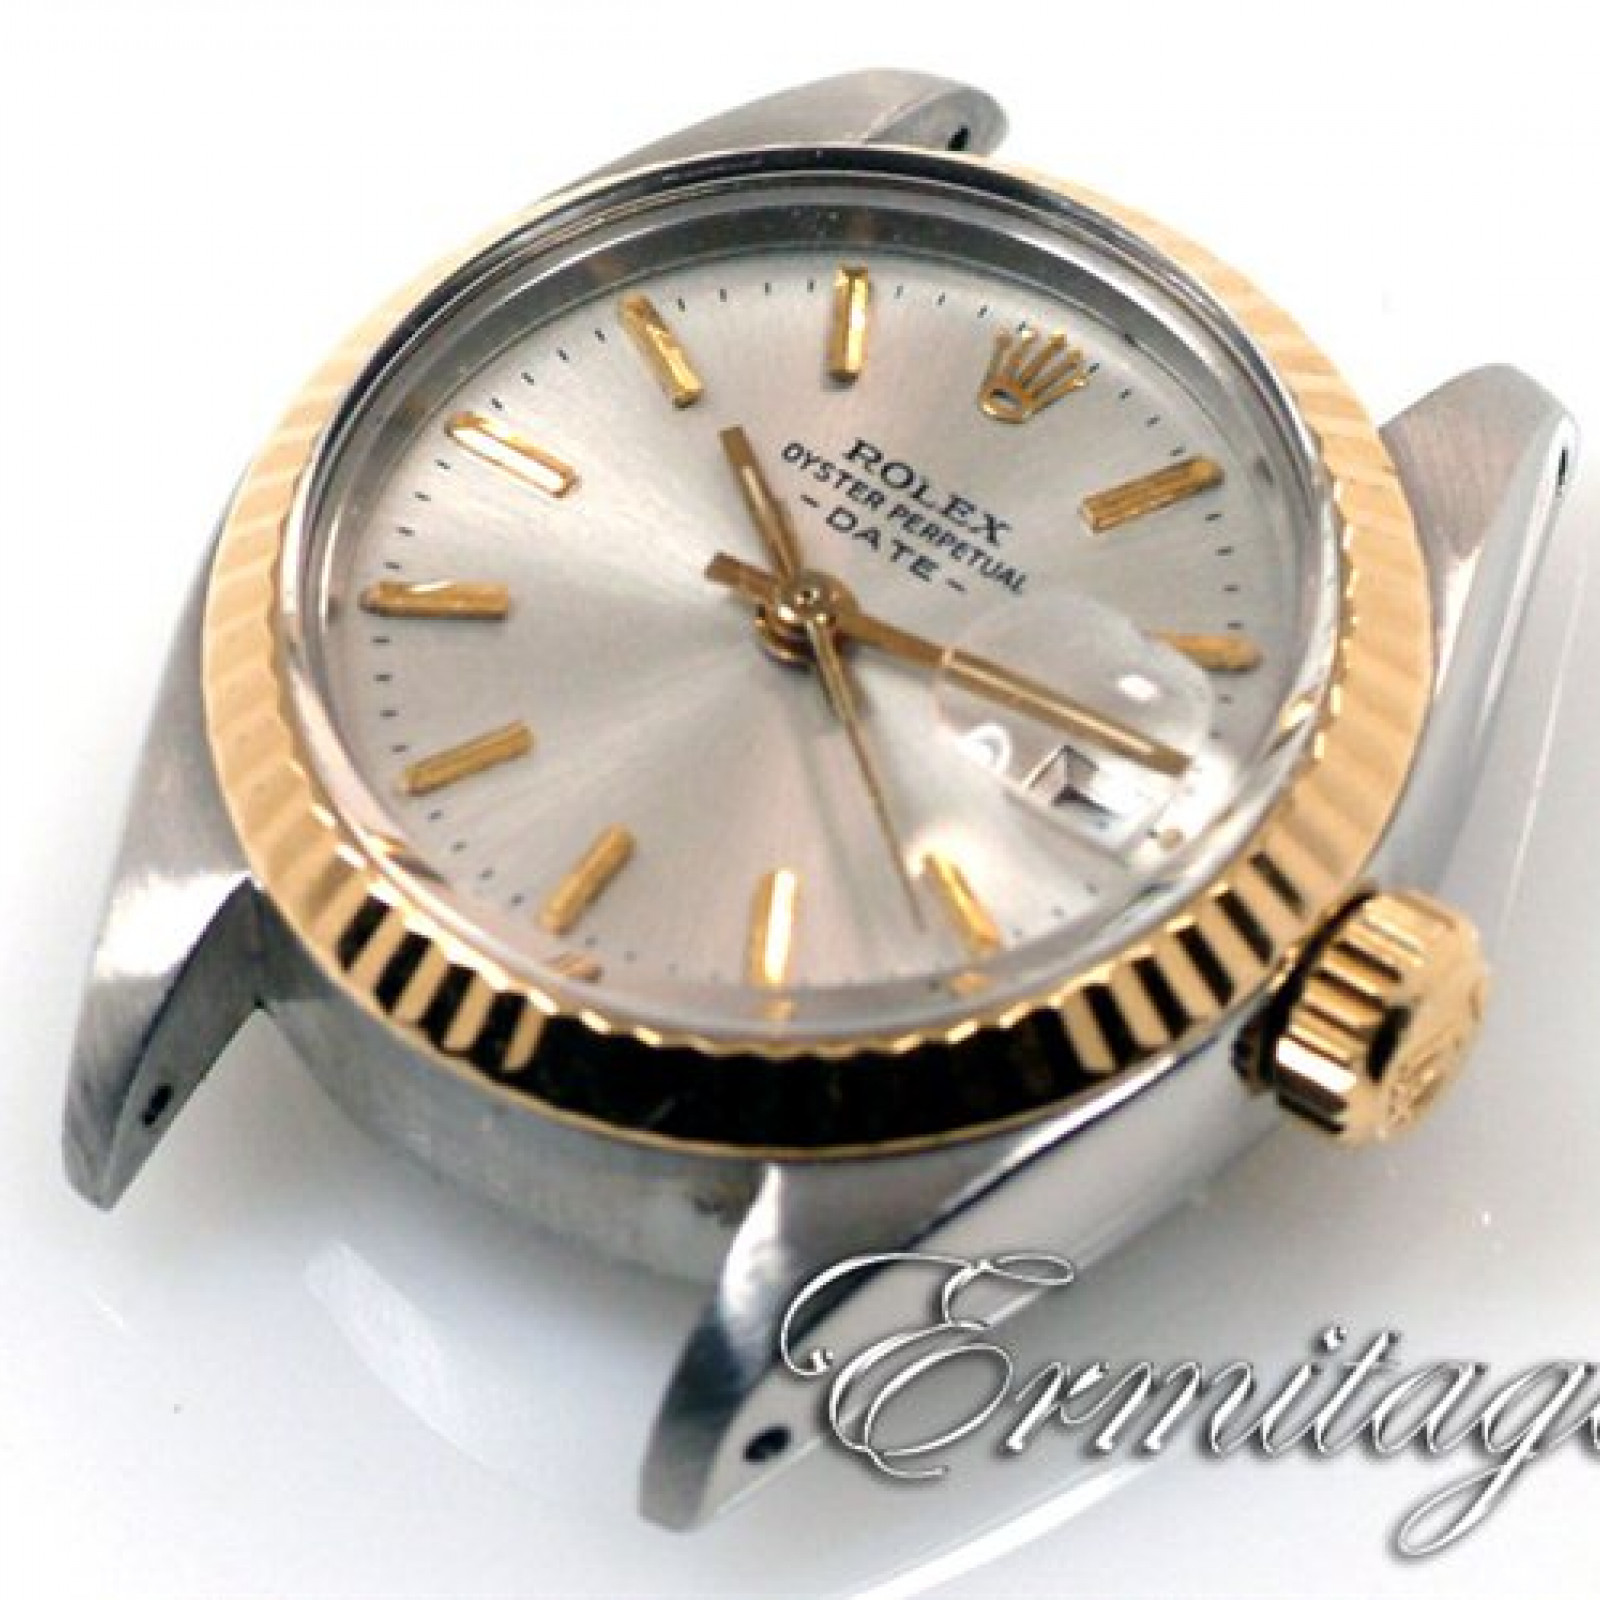 Vintage Rolex Oyster Perpetual Date 6916 Gold & Steel